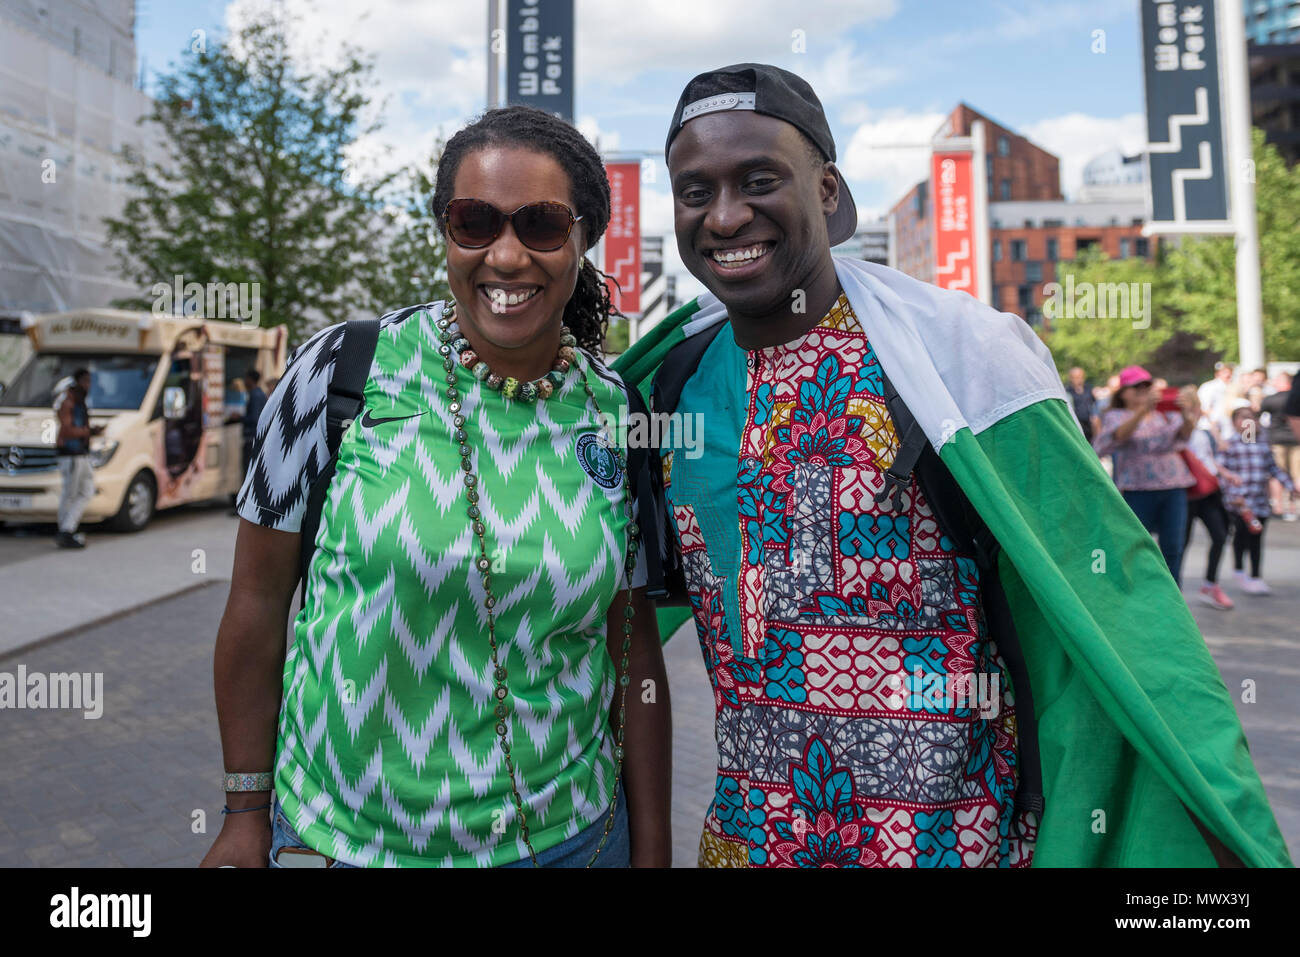 London, UK.  2 June 2018.  A Nigerian fan (L) wears the country's latest replica shirt, which bears a feathered pattern referencing the Nigerian team which made its debut in the 1994 World Cup.  3 million replica shirts have sold on pre-order alone with others selling out in minutes online. Fans arrive for the friendly football match between England and Nigeria at Wembley Stadium, the final match at Wembley before England travel to the World Cup in Russia  Credit: Stephen Chung / Alamy Live News Stock Photo